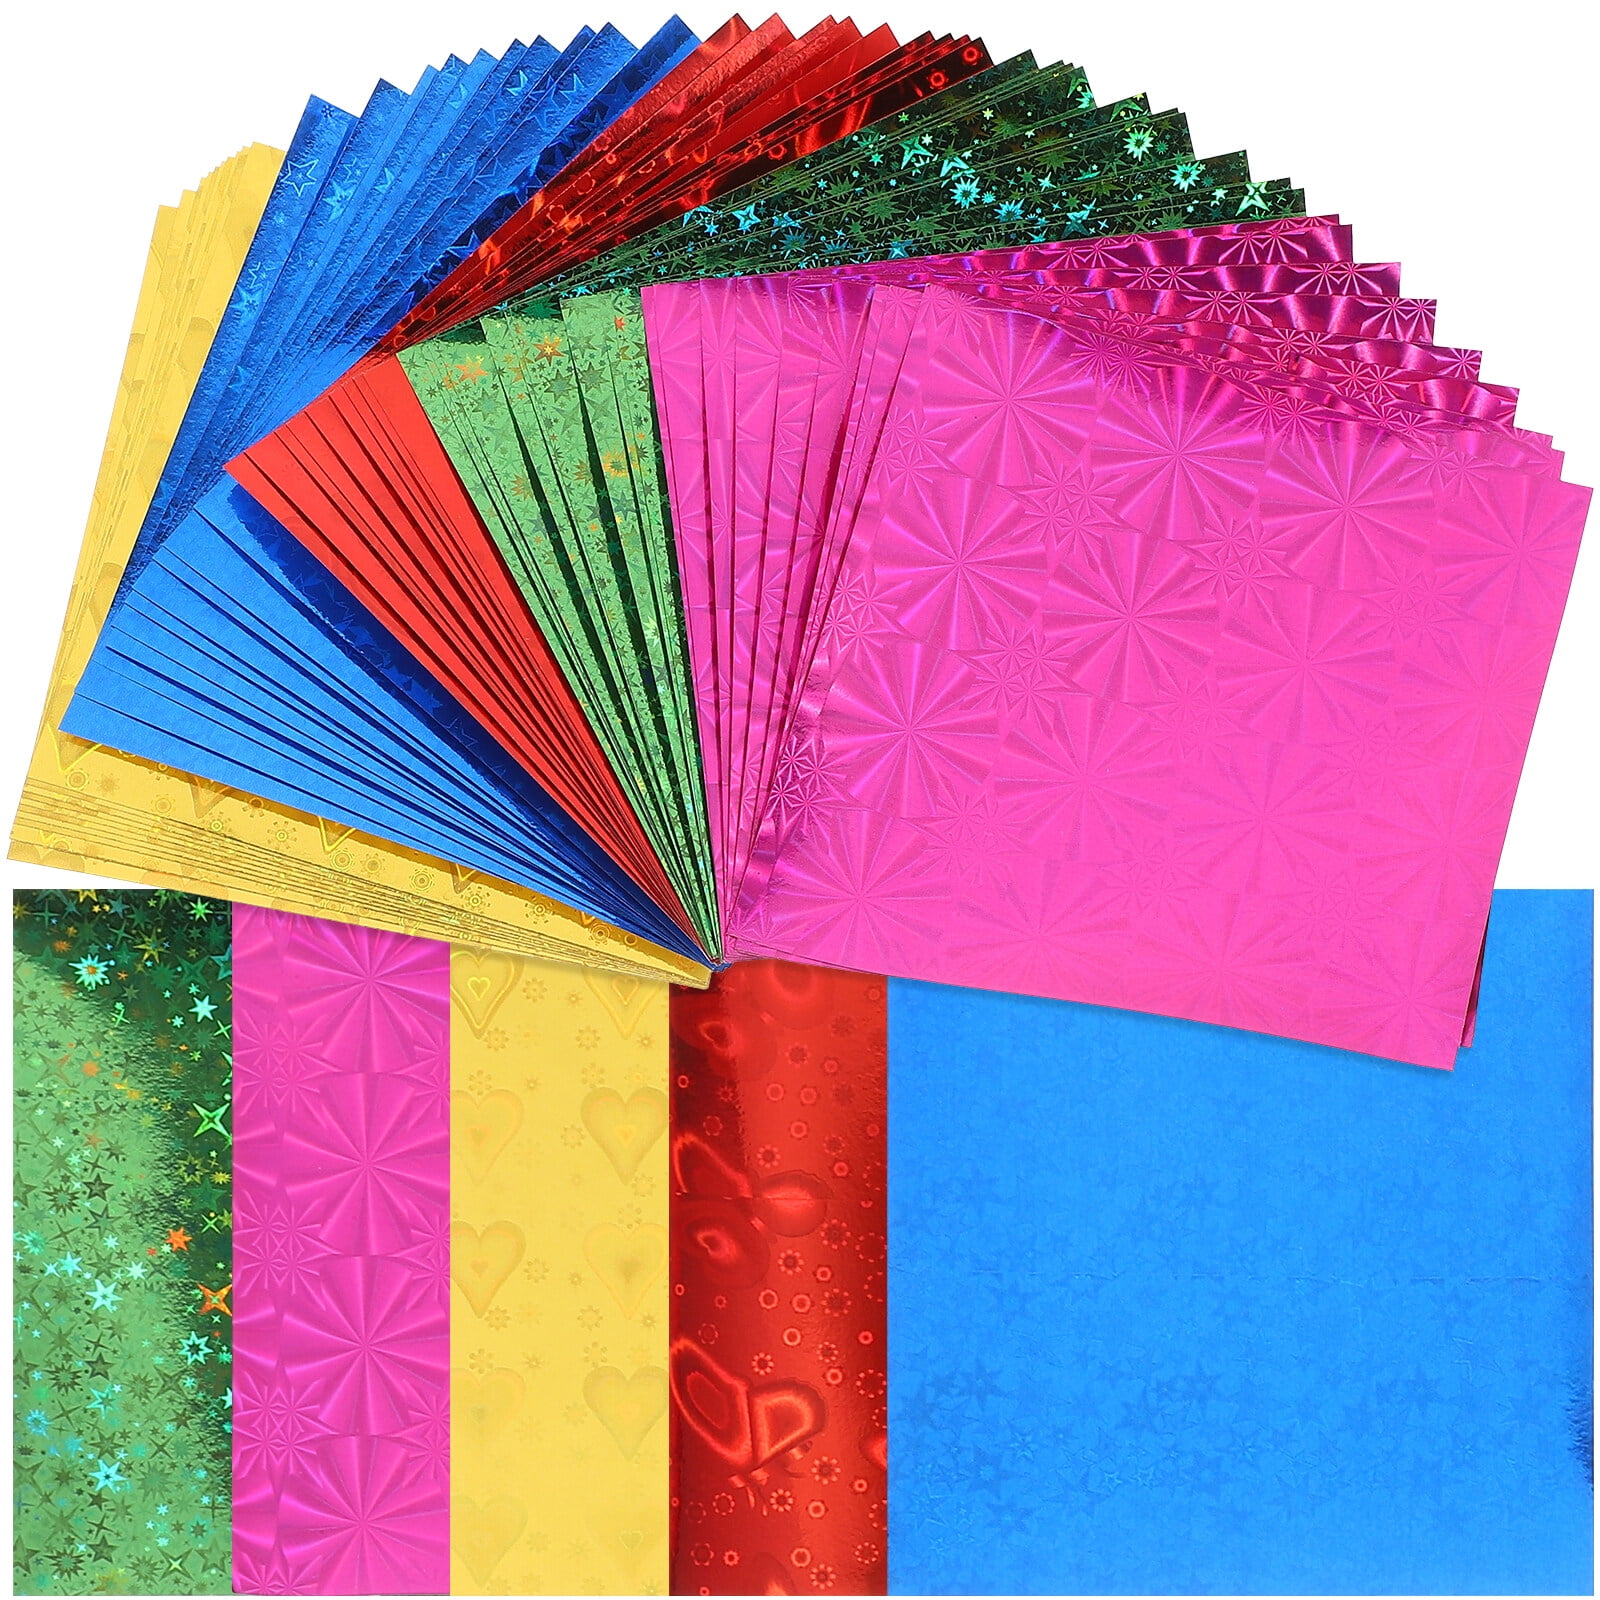  EXCEART 50pcs Jam Reflective Paper Journal Paper Diary Material  Paper Foil Mirror Cardstock Holographic Paper Origami for Kids Dual-Sided  Folding Paper Fine A4 Kraft Paper